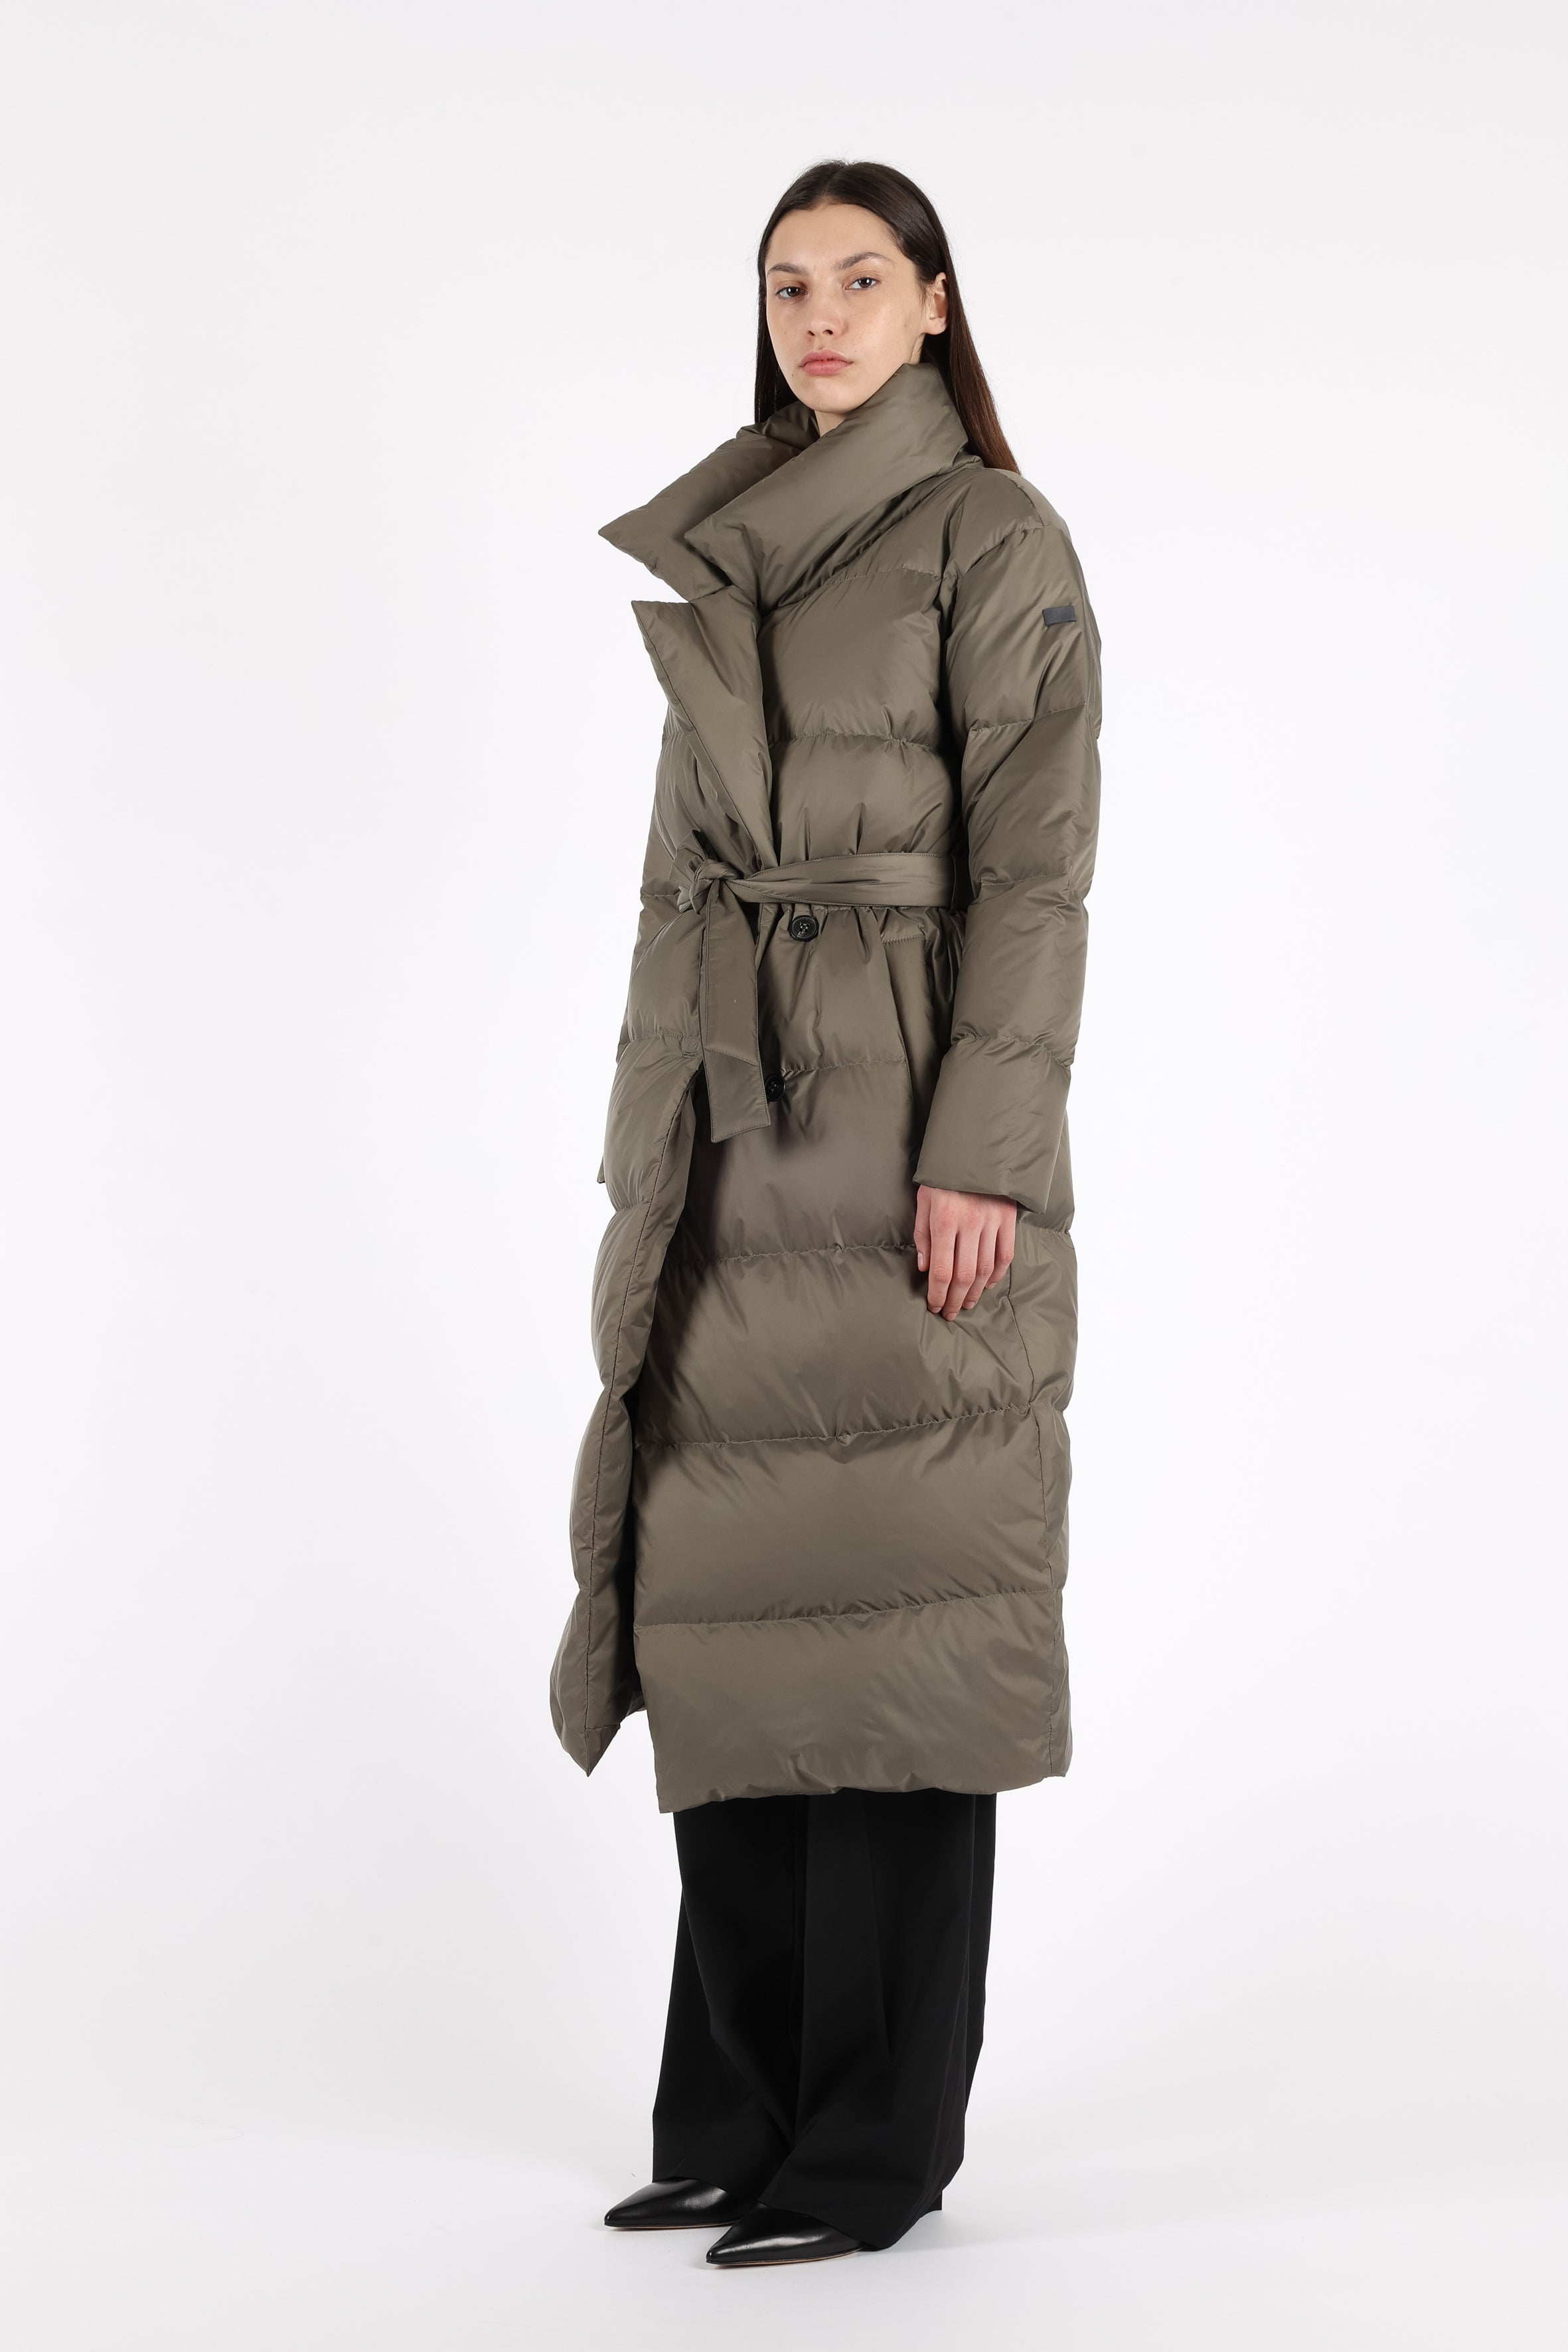 Long belted Lempelius Downcoat in the color olive